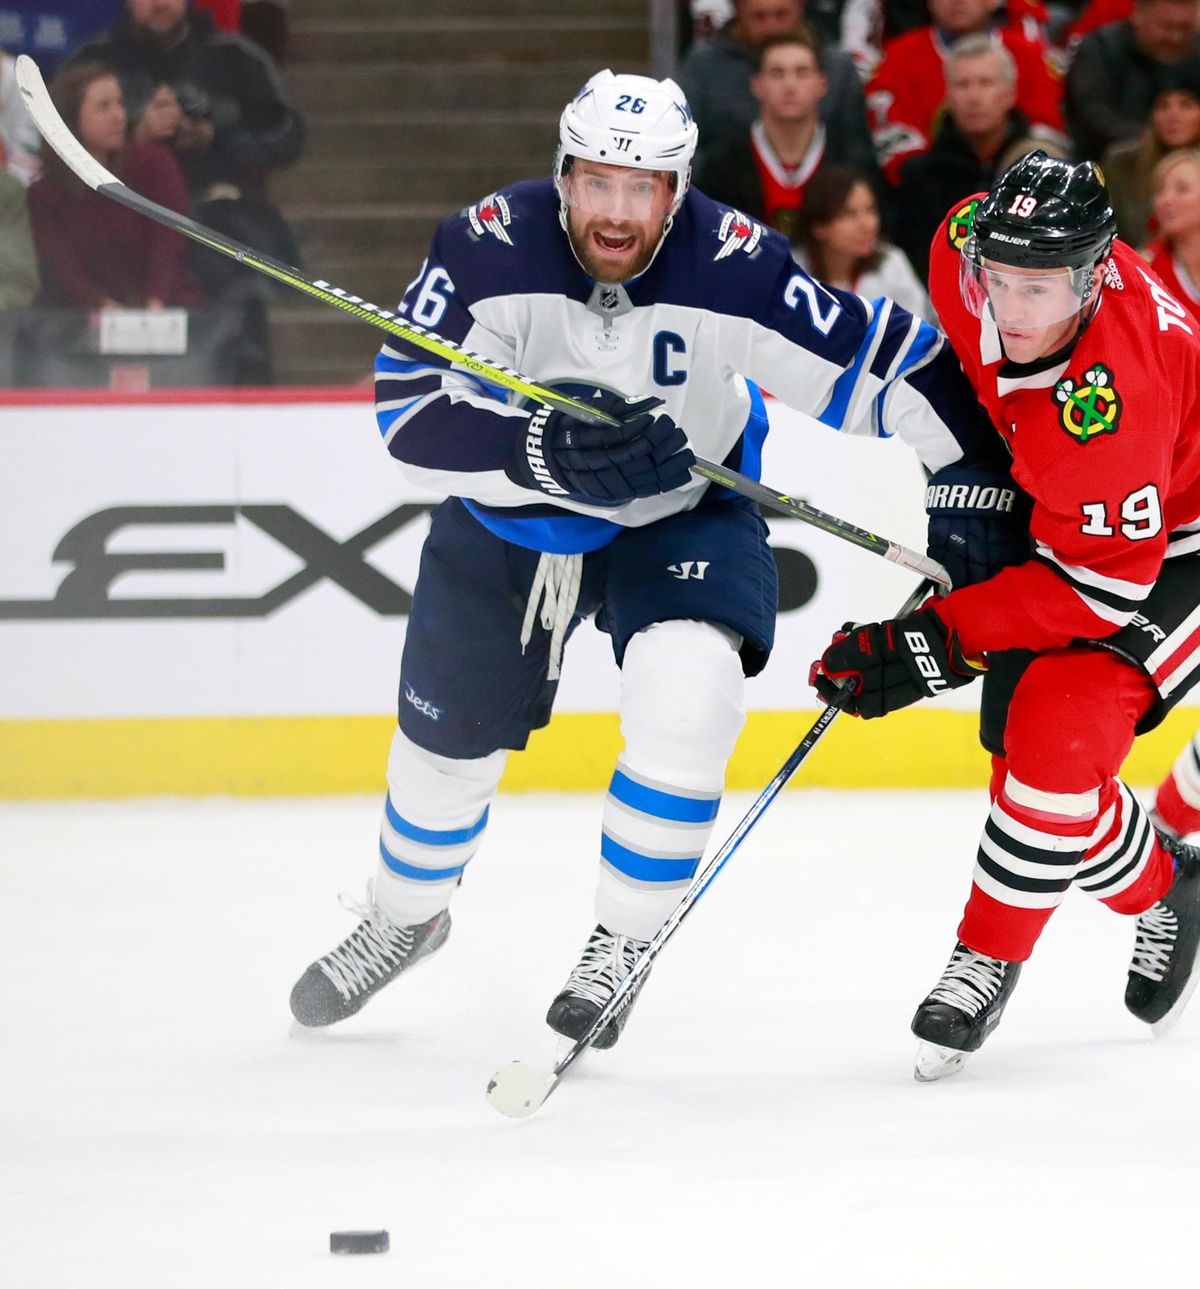 In this Jan. 12, 2018, file photo, Winnipeg Jets right wing Blake Wheeler (26) and Chicago Blackhawks center Jonathan Toews (19) vie for the puck during the first period of an NHL hockey game in Chicago. Wheeler is one of about a dozen players in the NHL MVP race. (Jeff Haynes / Associated Press)